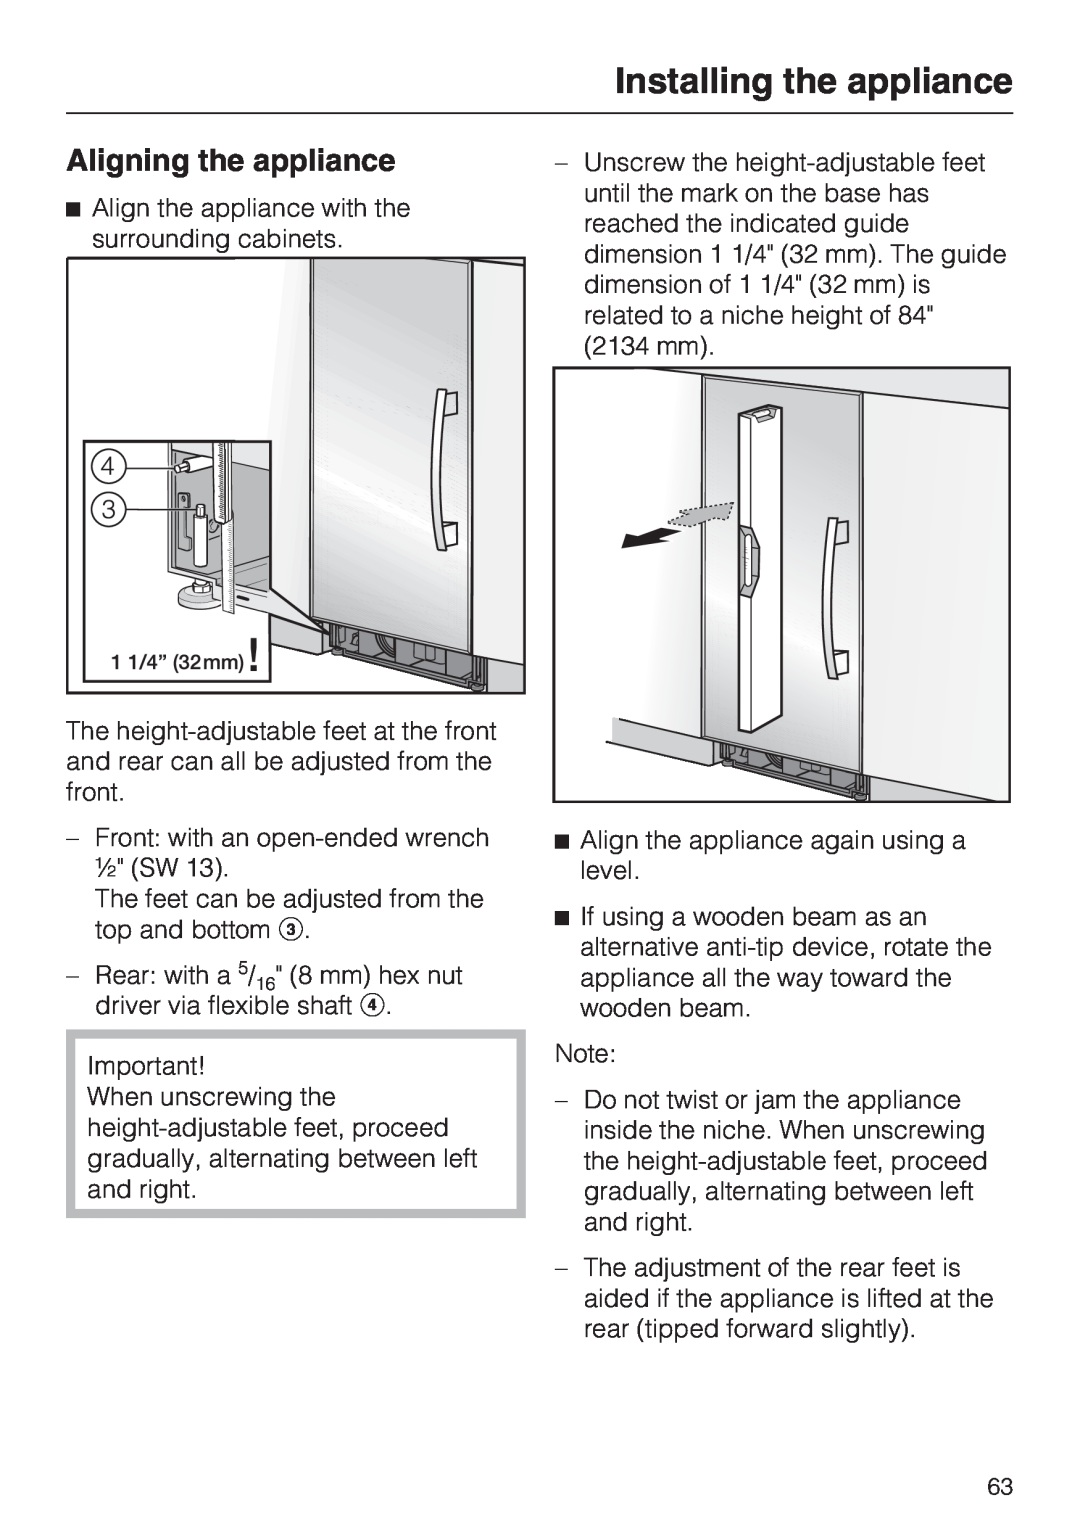 Miele F 1911 SF, F 1811 SF, F 1801 SF, F 1901 SF installation instructions Aligning the appliance, Installing the appliance 